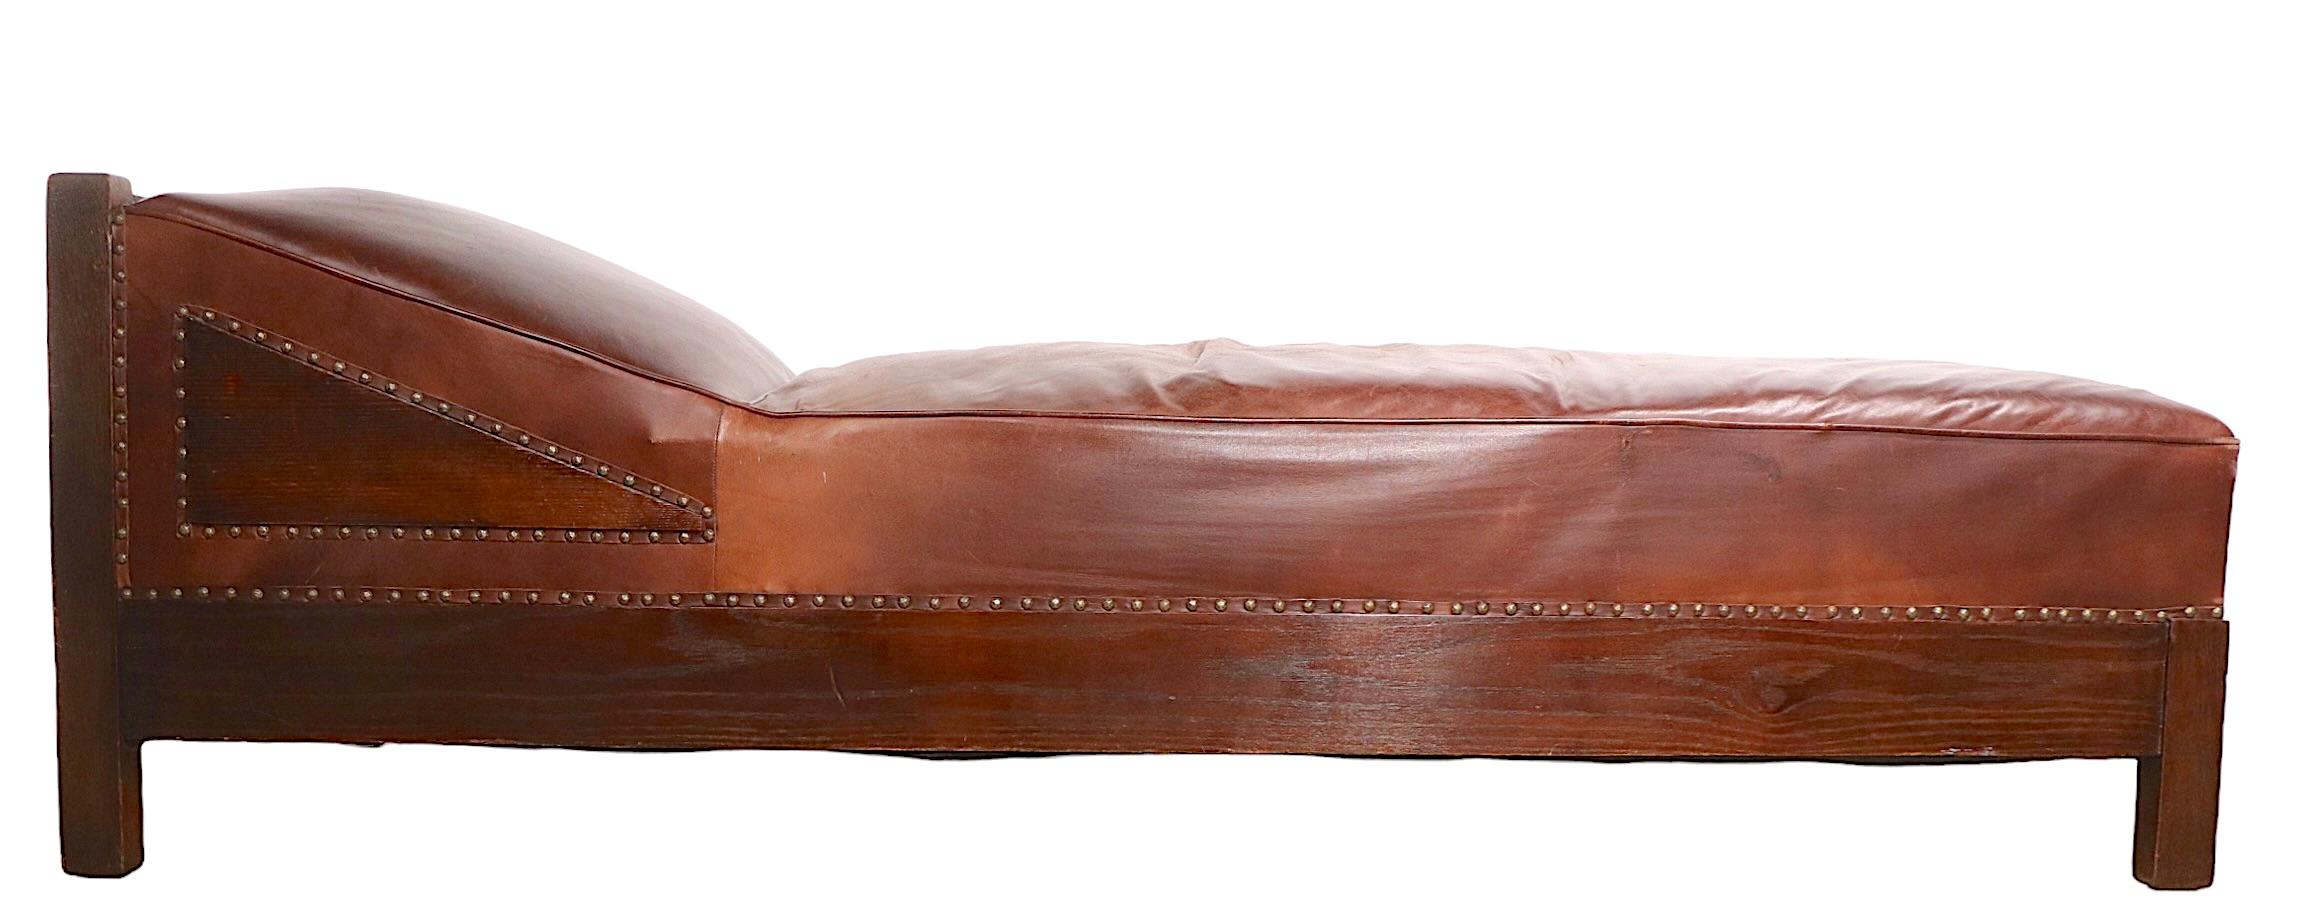 Architectural Mission, Arts and Crafts daybed, chaise lounge, in solid oak and leather with brass nailhead trim. The chaise is in very good condition, we believe the leather upholstery is later, but not new. Bold, masculine lines, exceptional